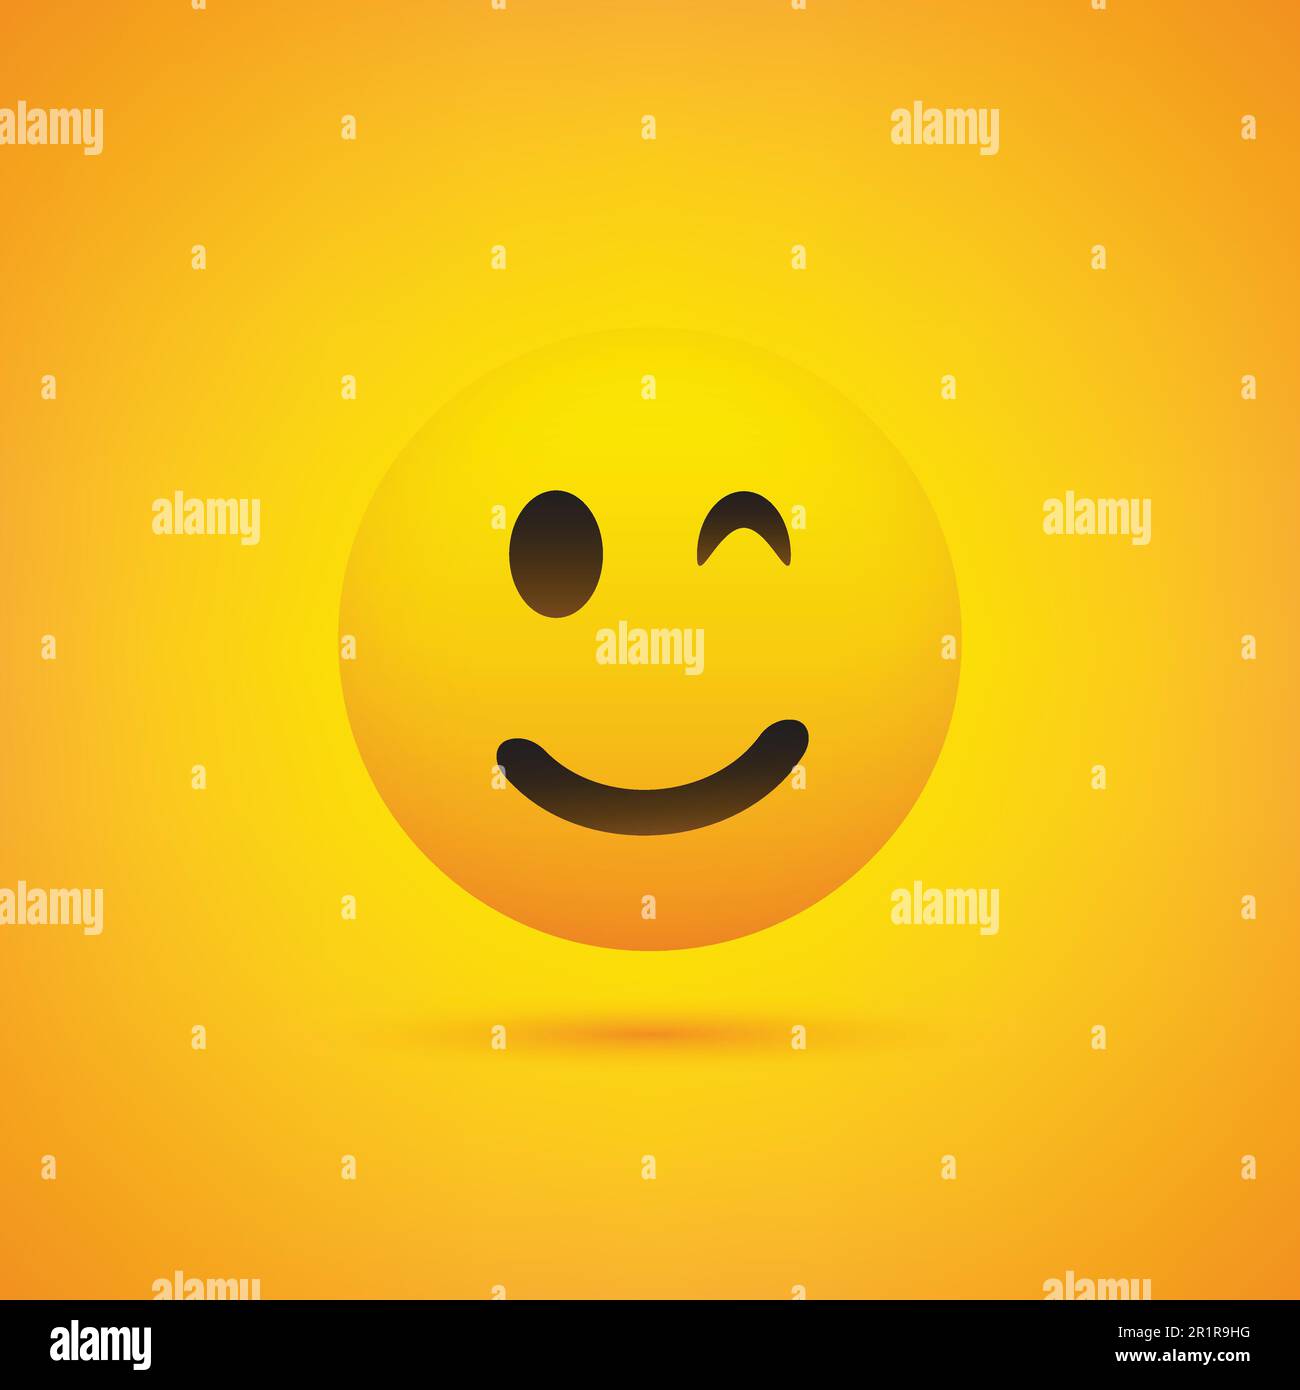 Smiling and Winking Emoji - Simple Shiny Happy Emoticon on Yellow Background Stock Vector